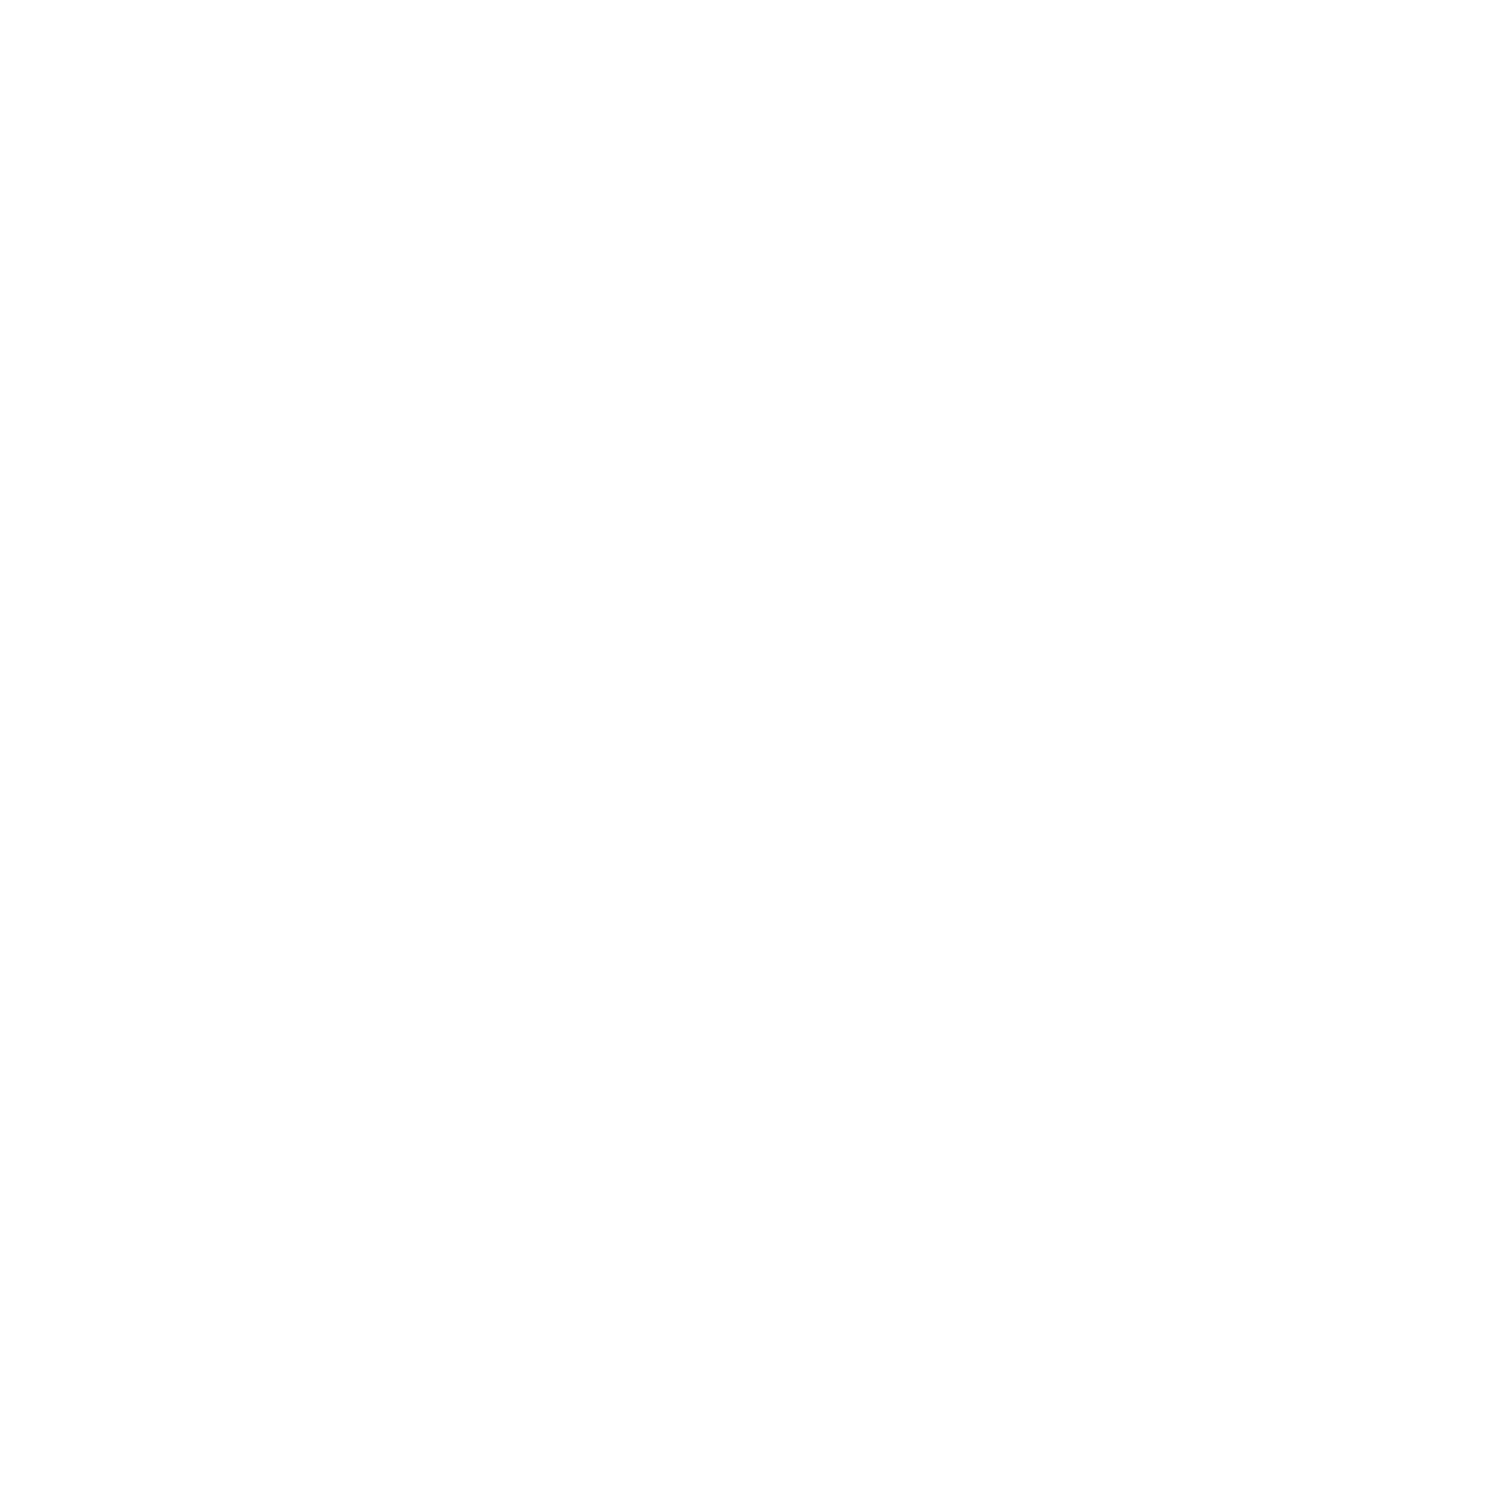 TRA Specialist Insurance Solutions